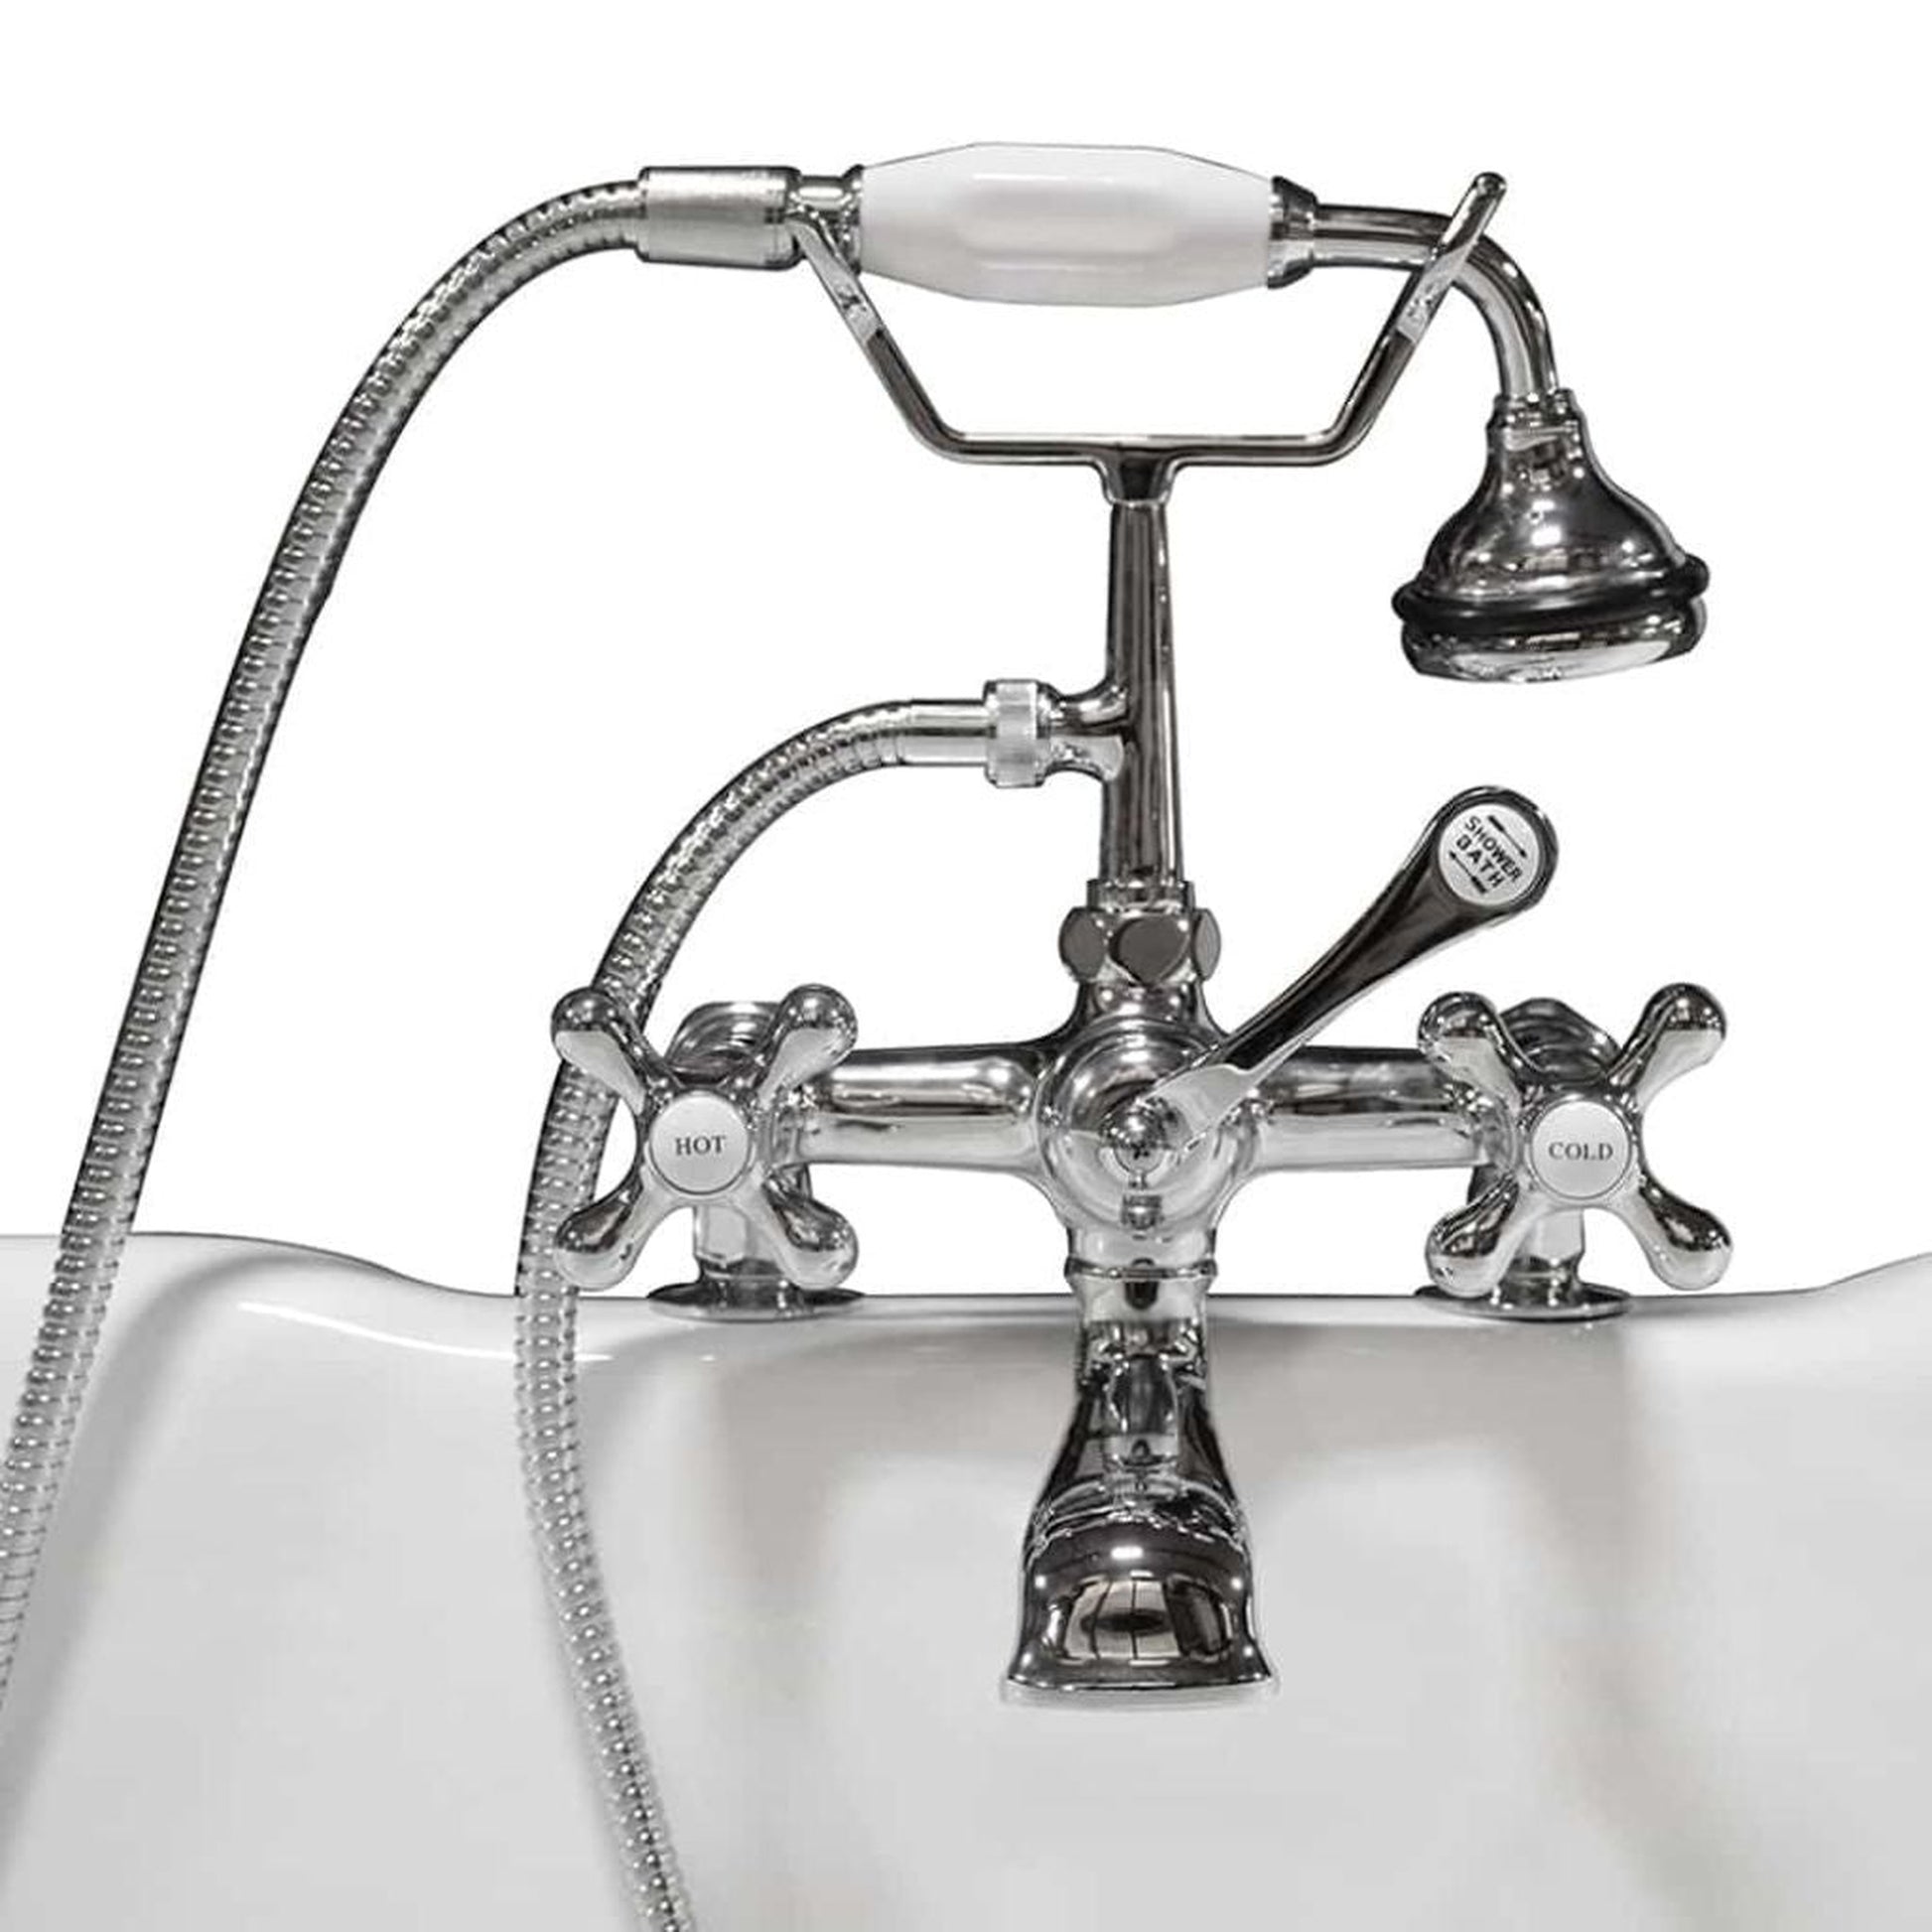 Cambridge Plumbing 2" Risers Polished Chrome Deck Mount British Telephone Style Faucet With Hand Held Shower